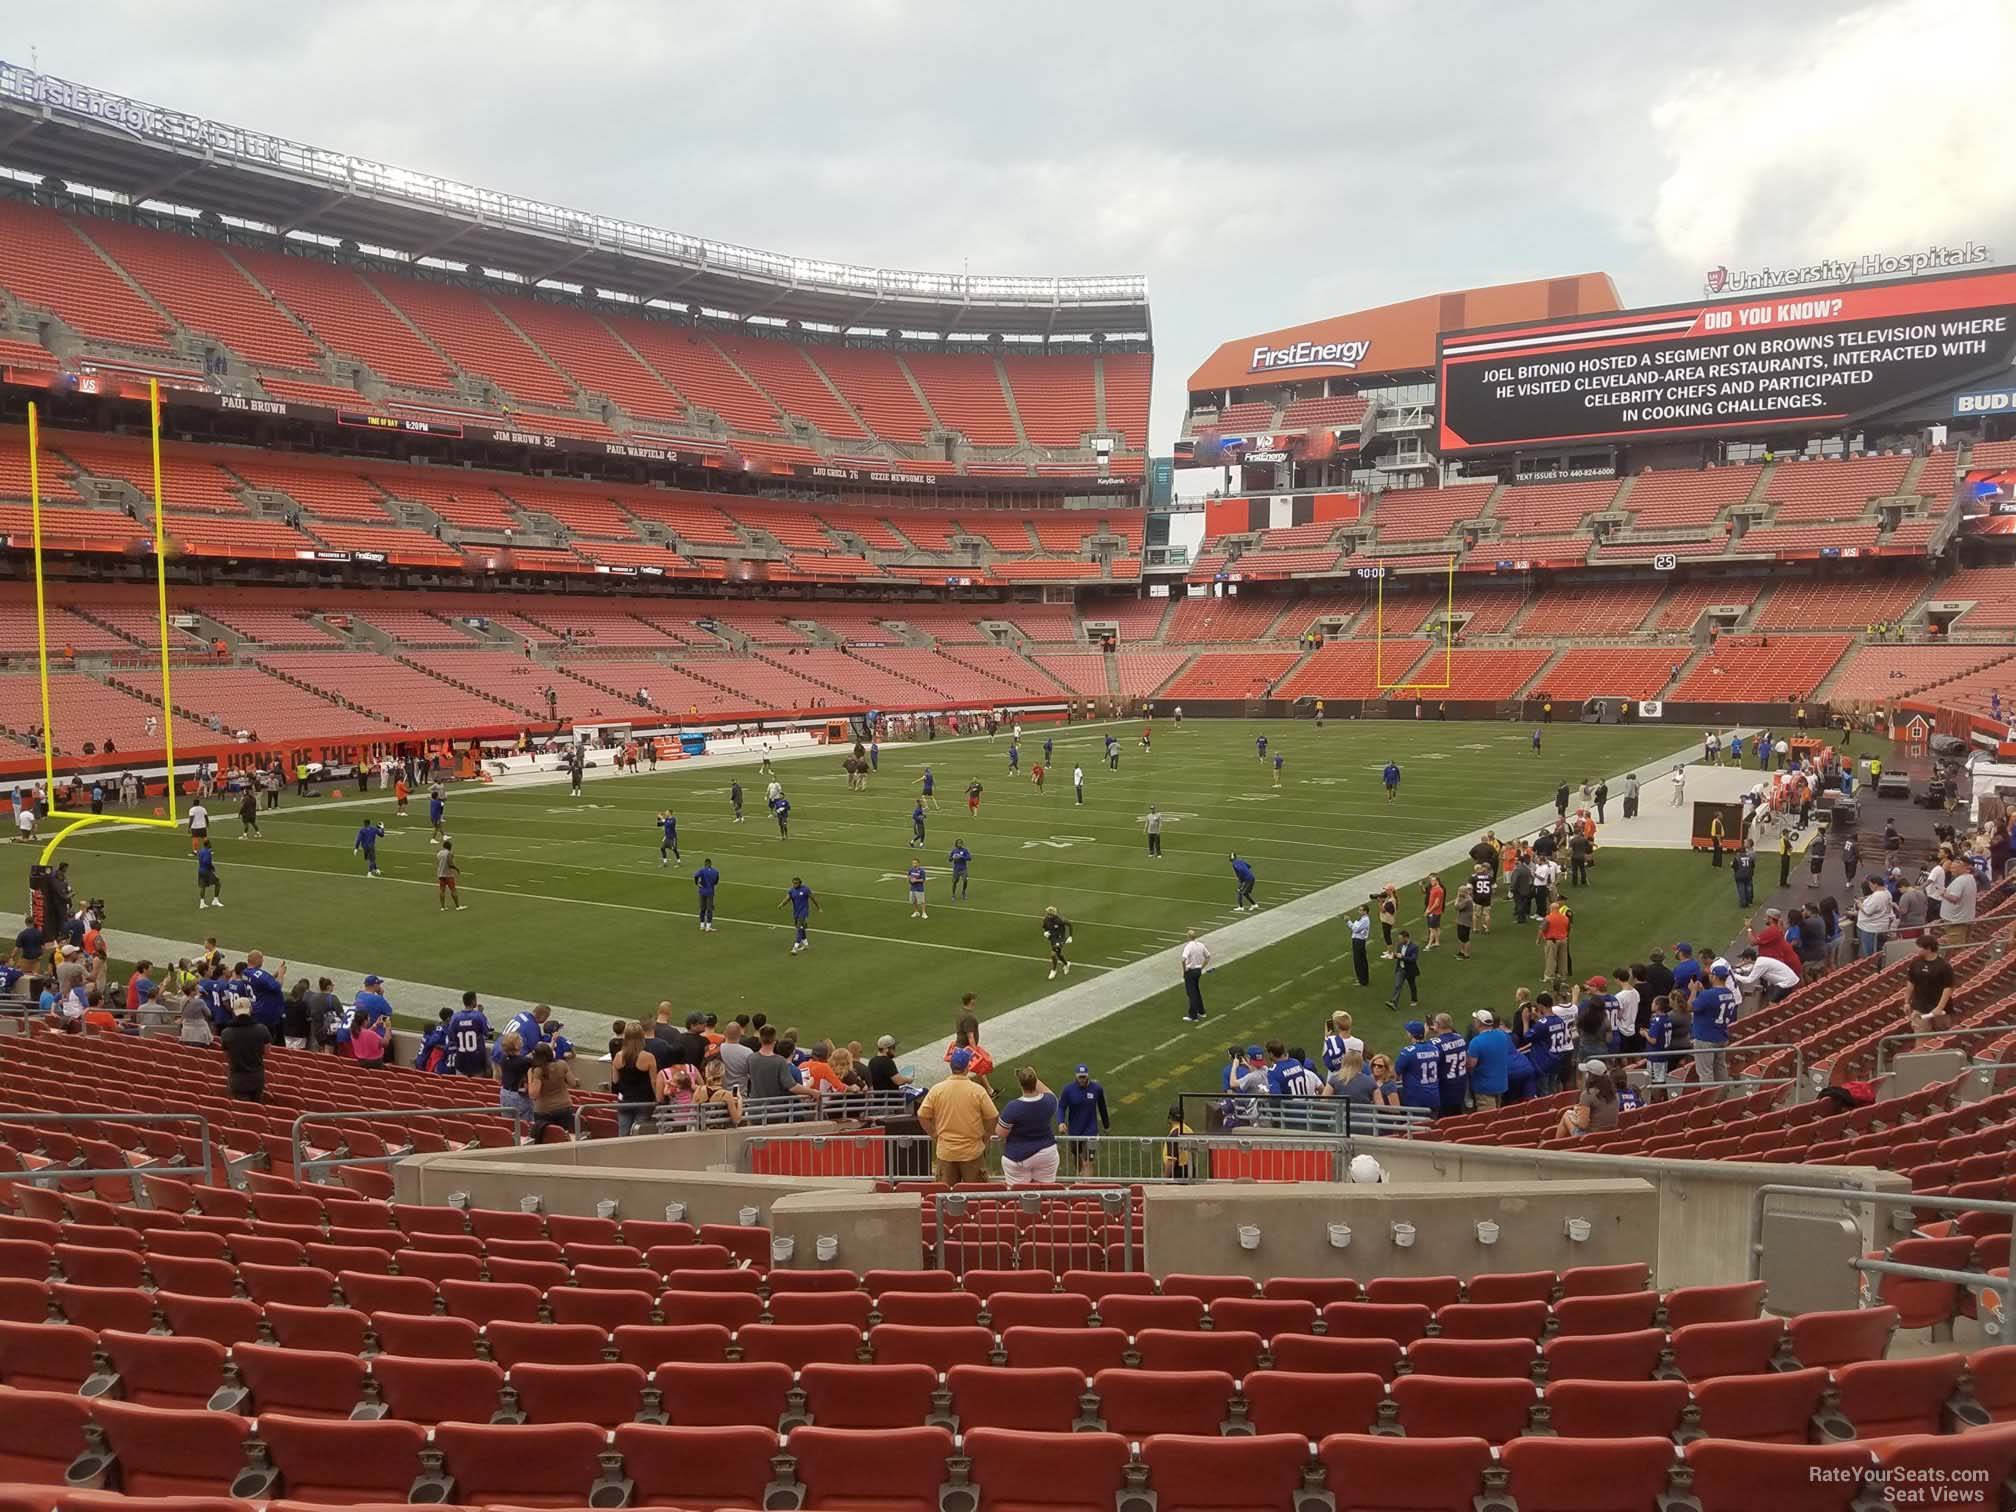 section 101, row 22 seat view  - cleveland browns stadium